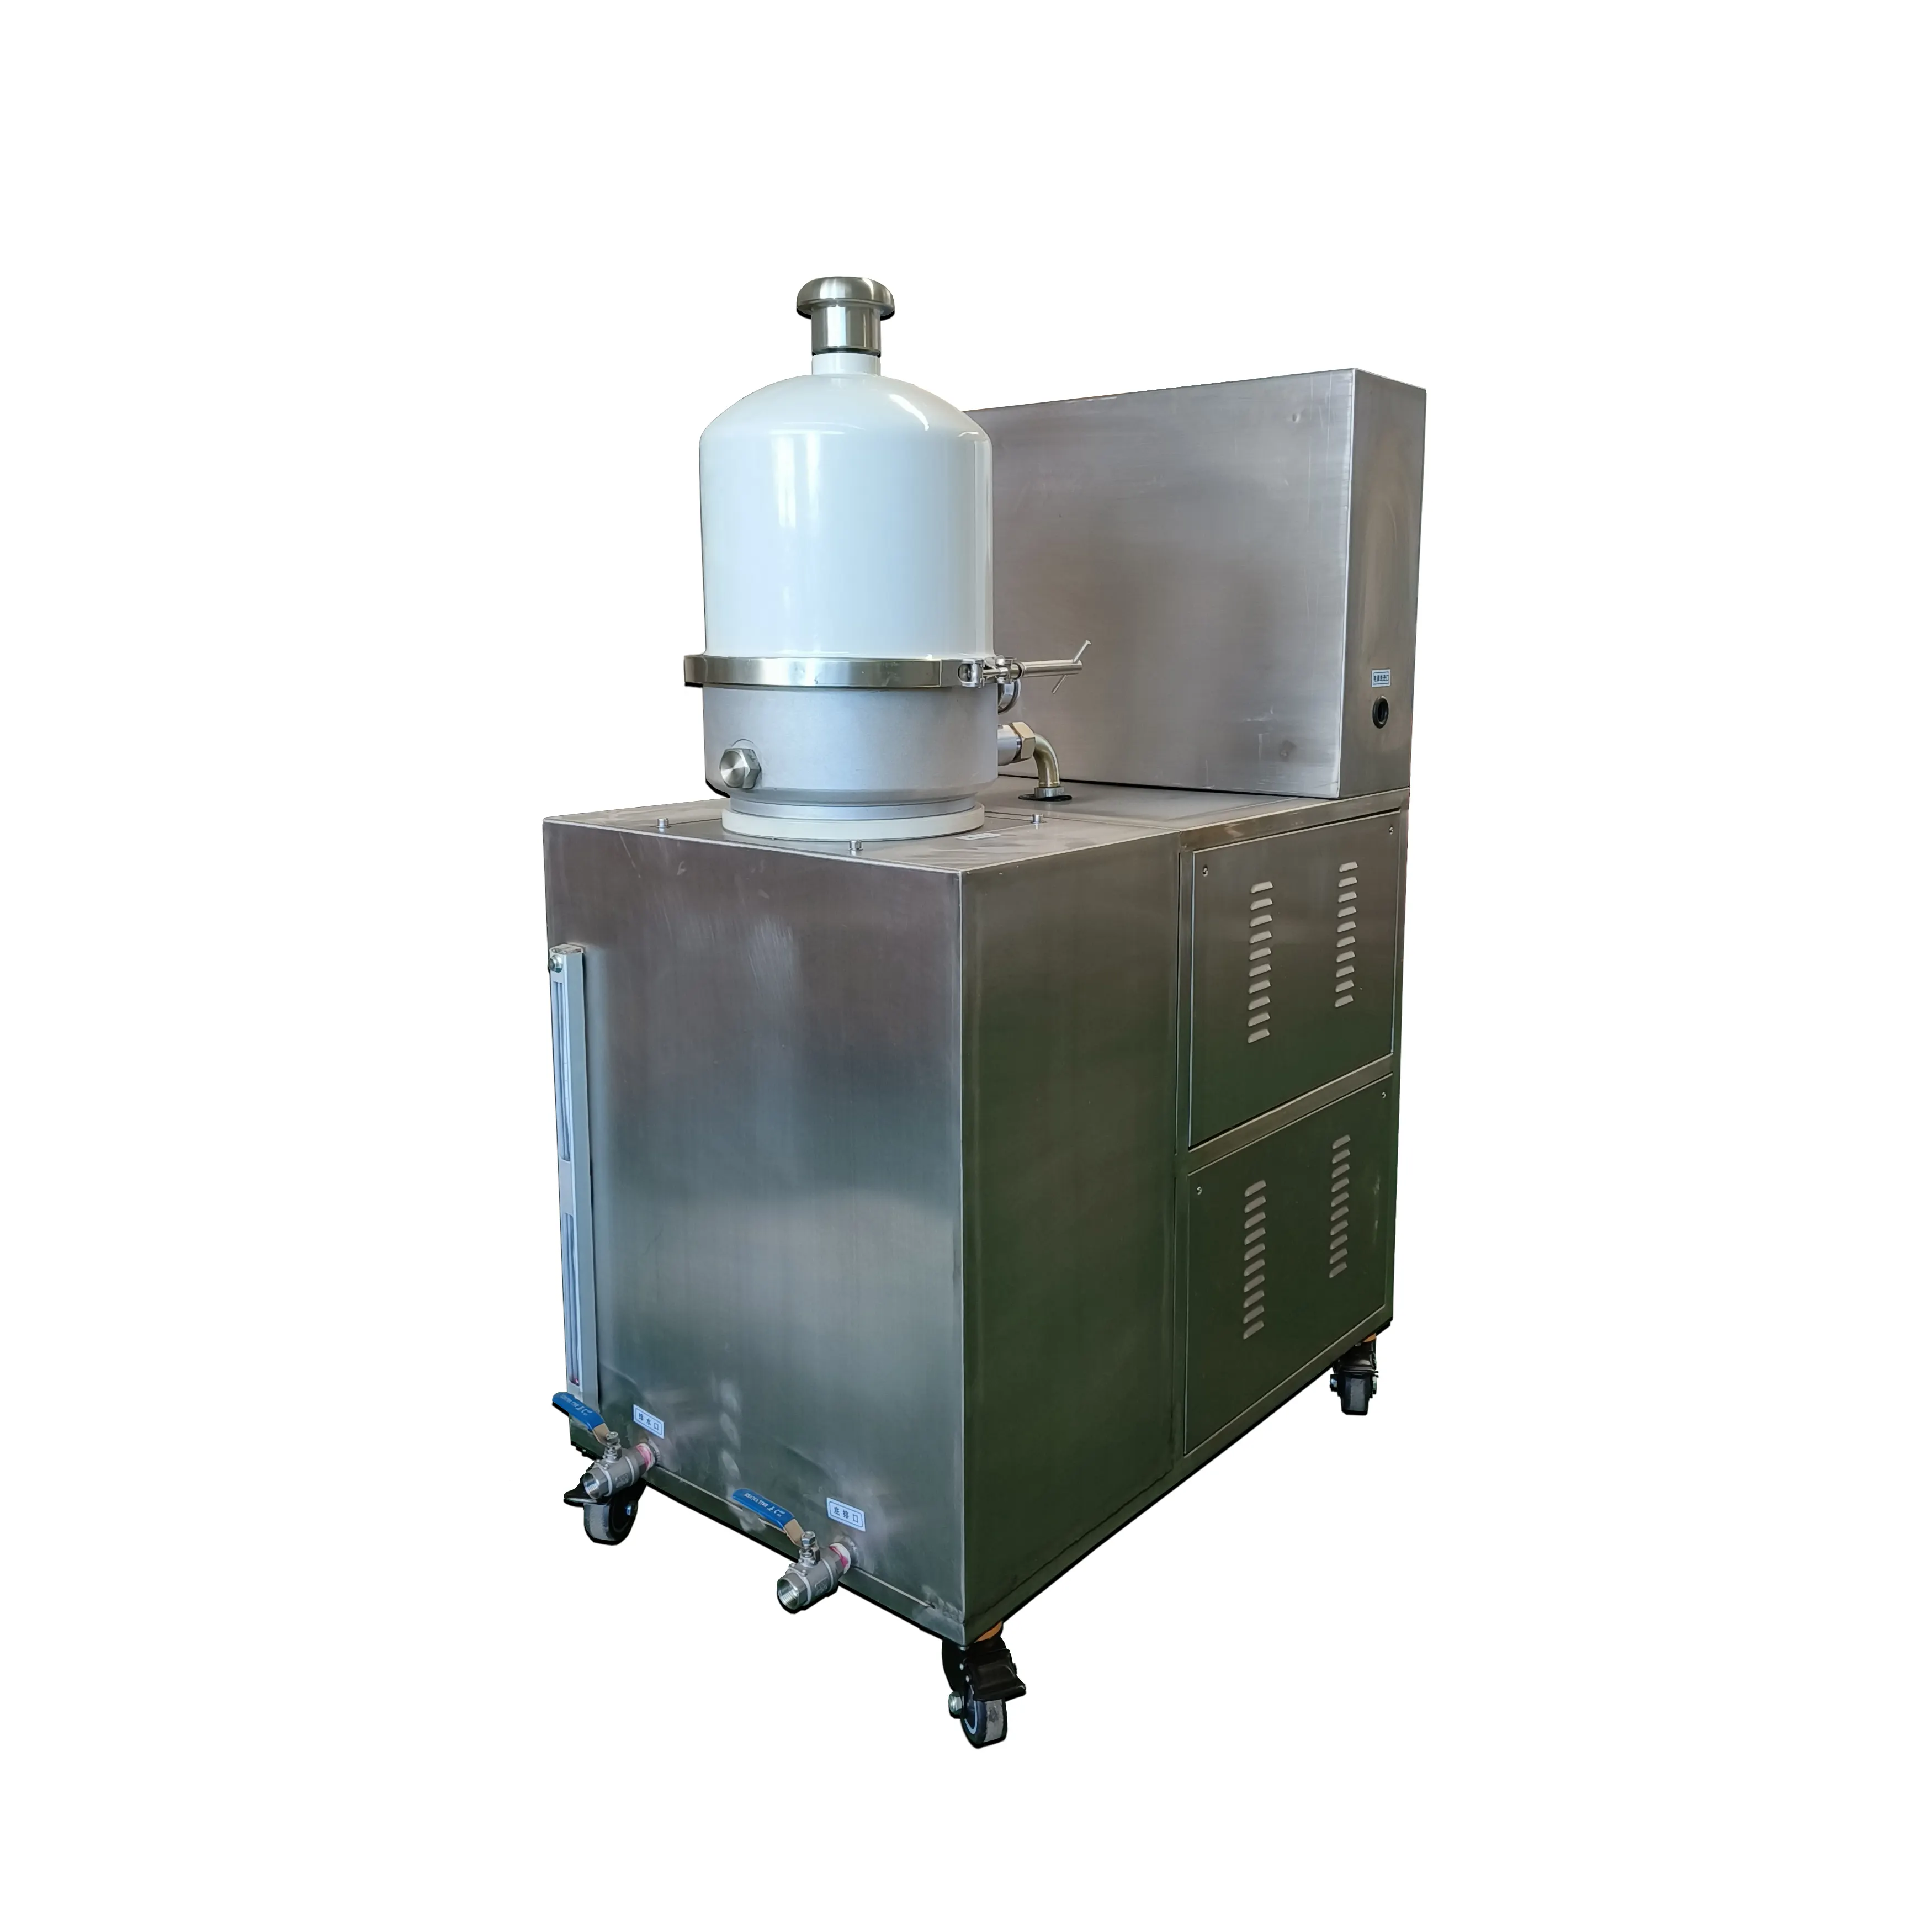 Oil filtration machine for cleaning oil